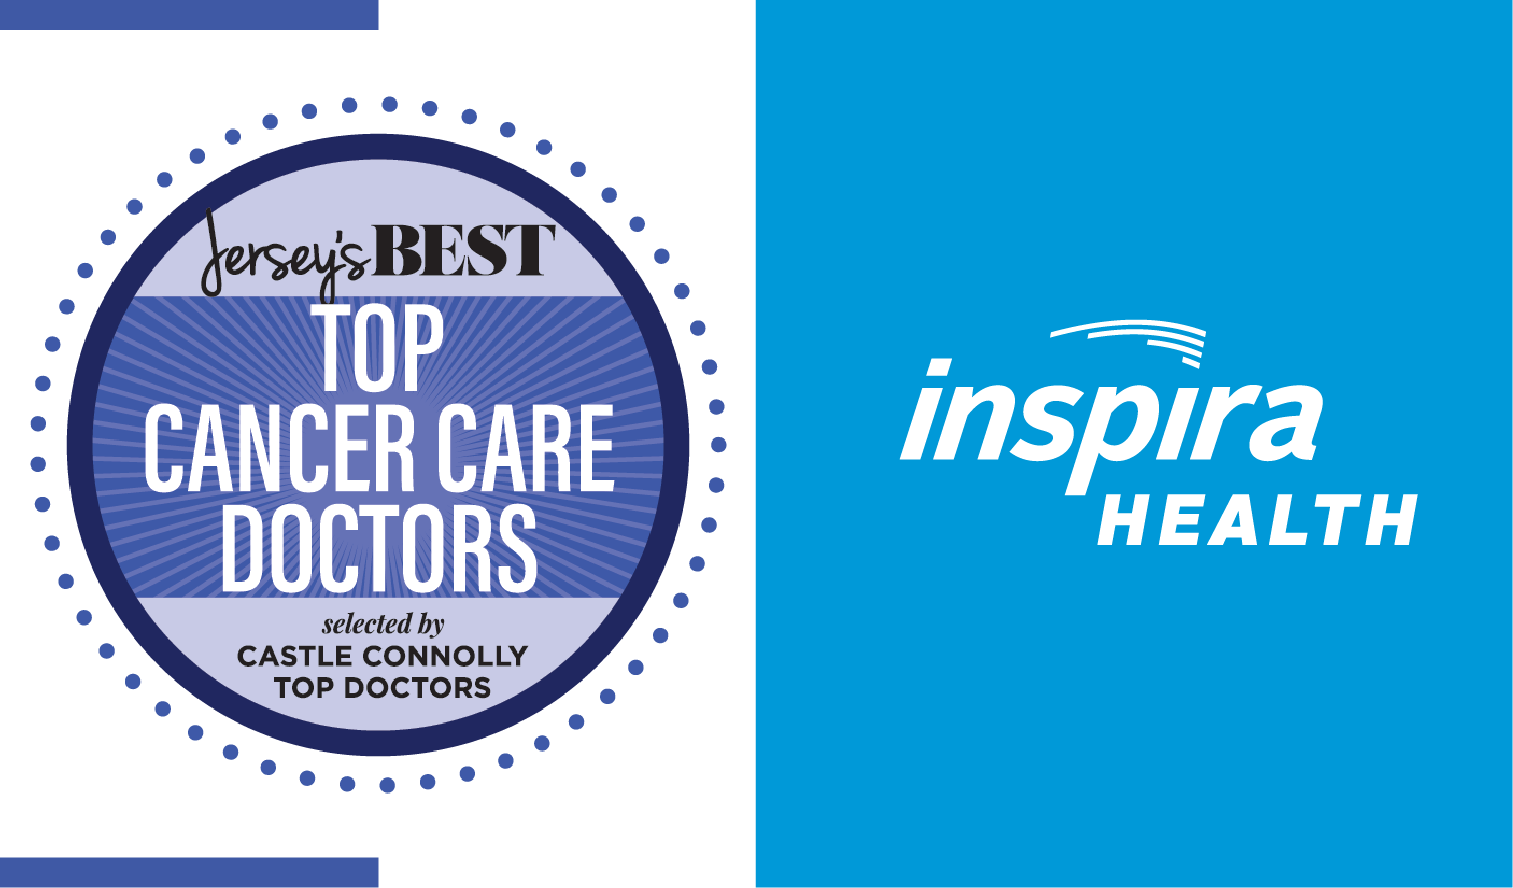 Jerseys Best Magazine Top Doctors in Cancer Care 2022 at Inspira Health